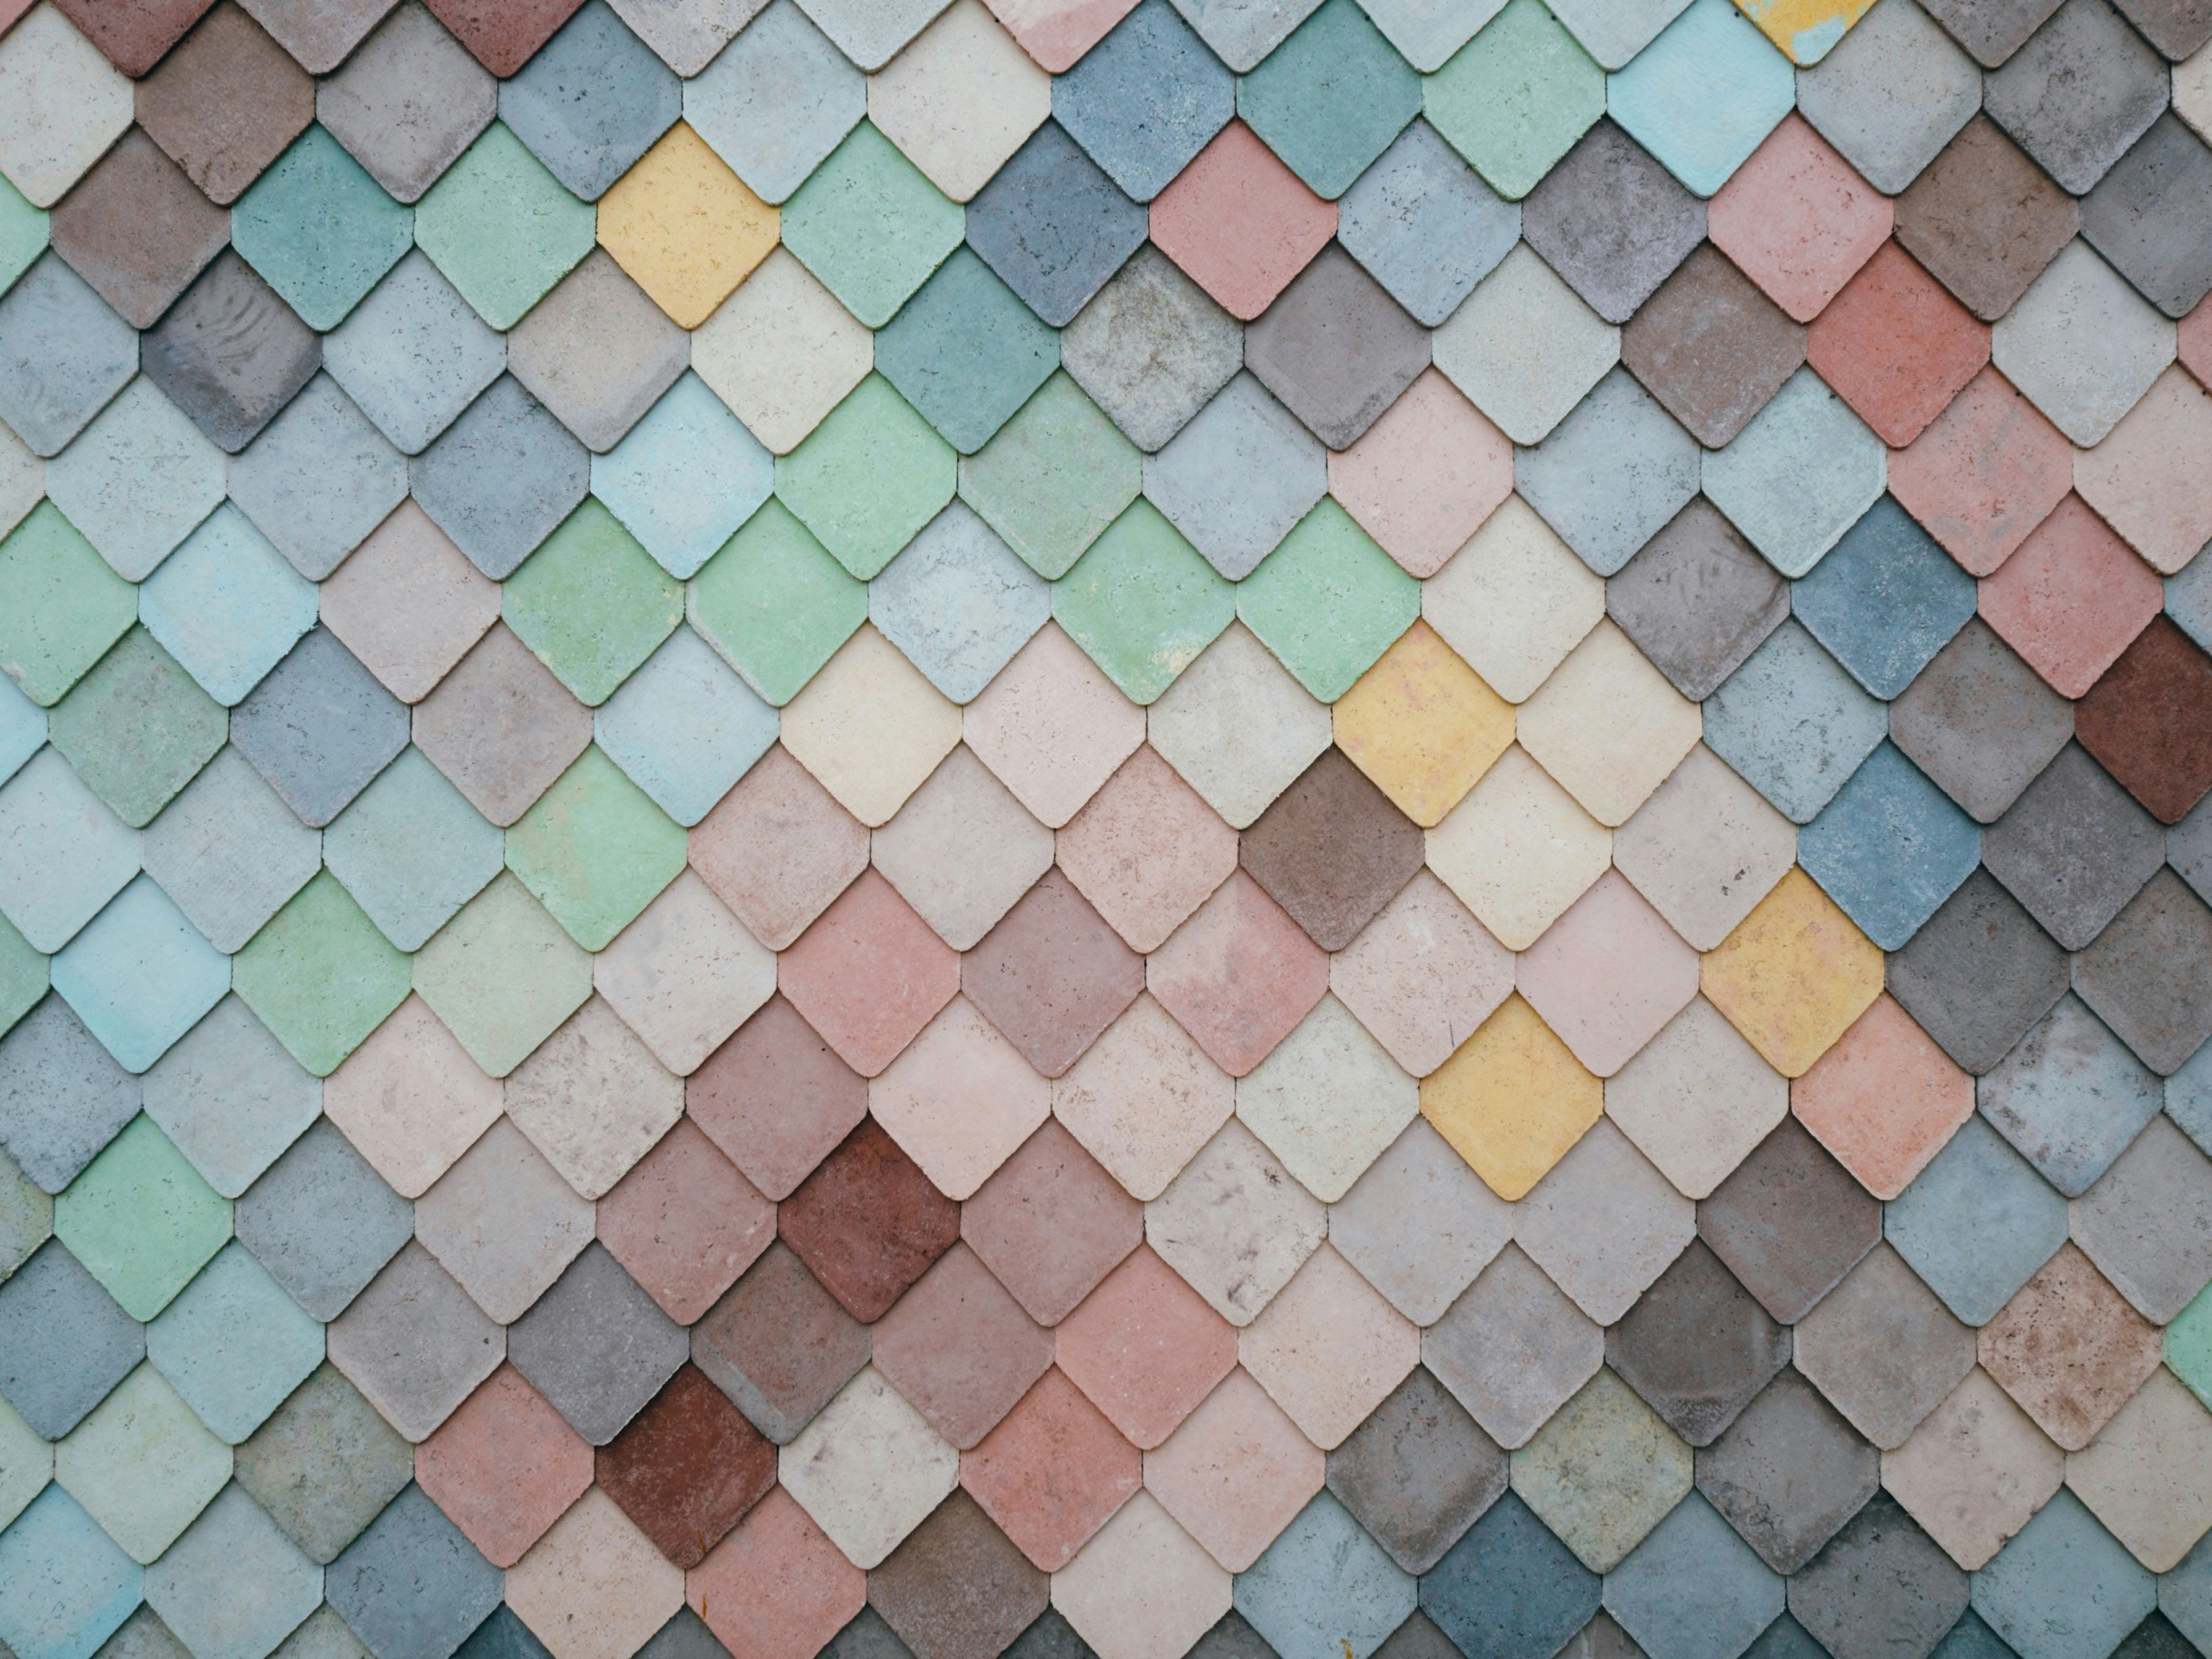 Multicolored interlocking tiles in a geometric formation.